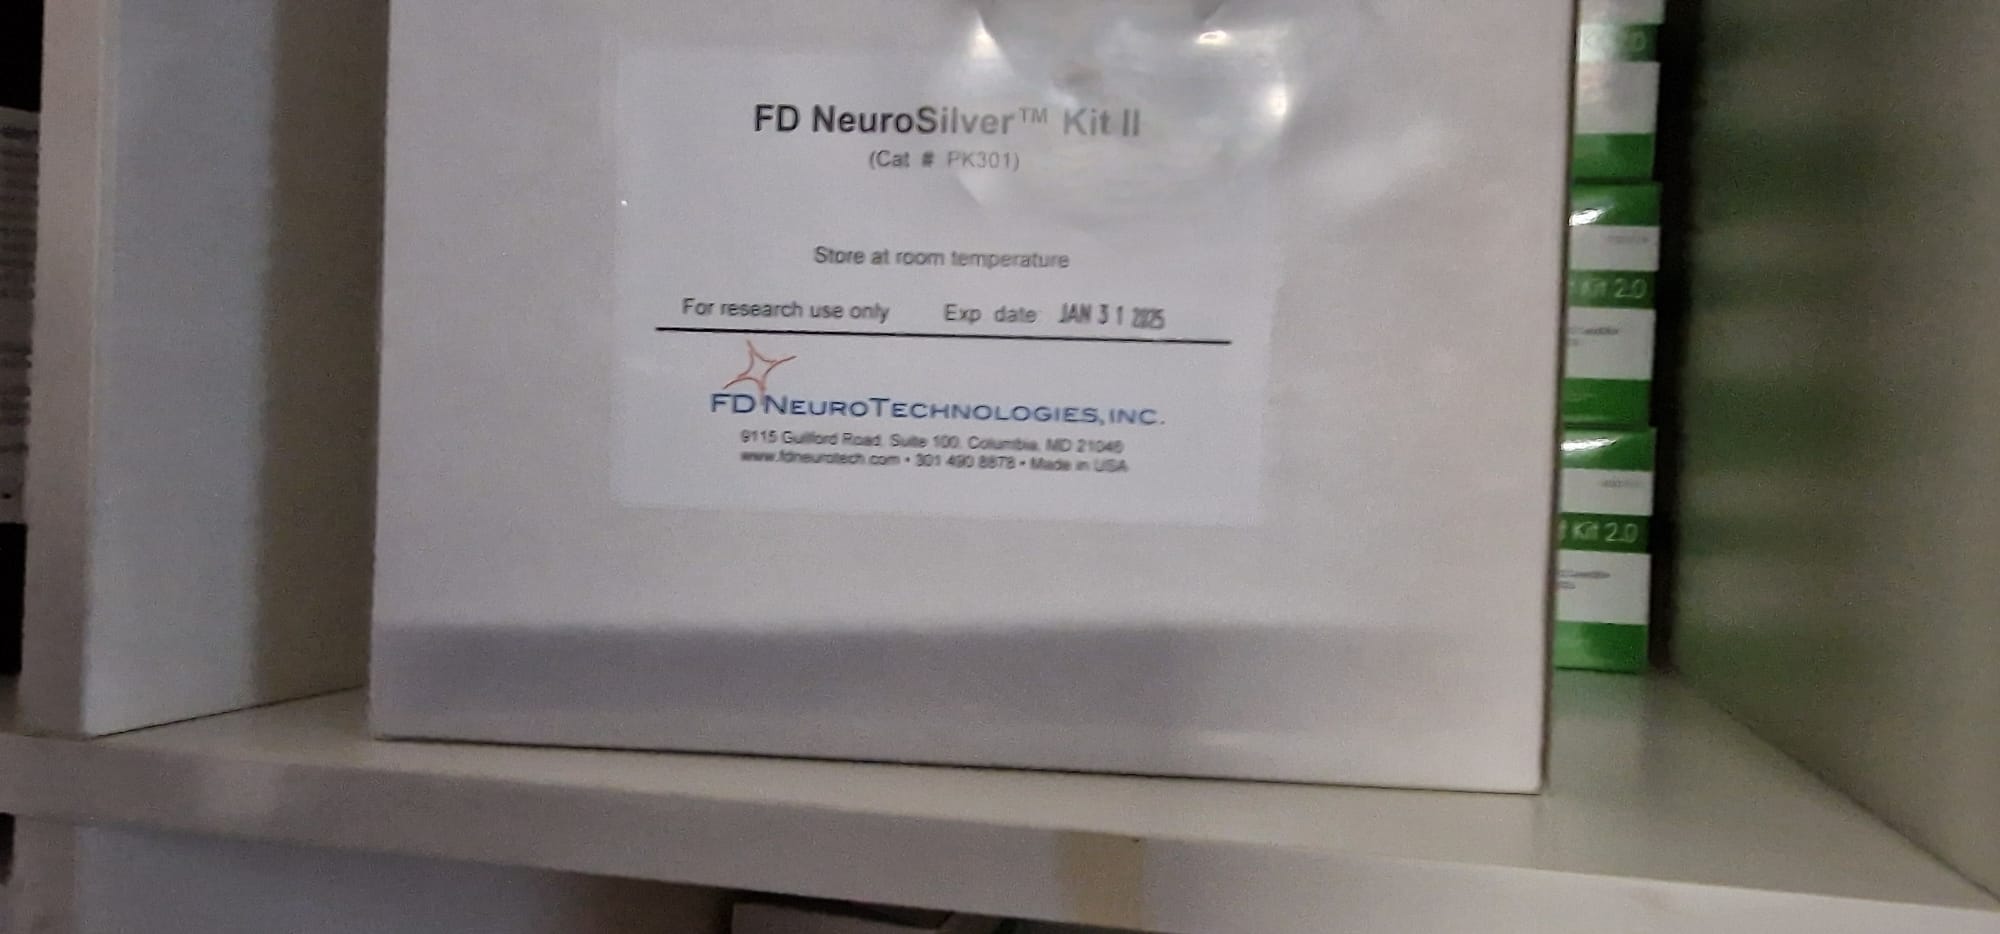 Product image Control Sections for FD NeuroSilver™ Kit